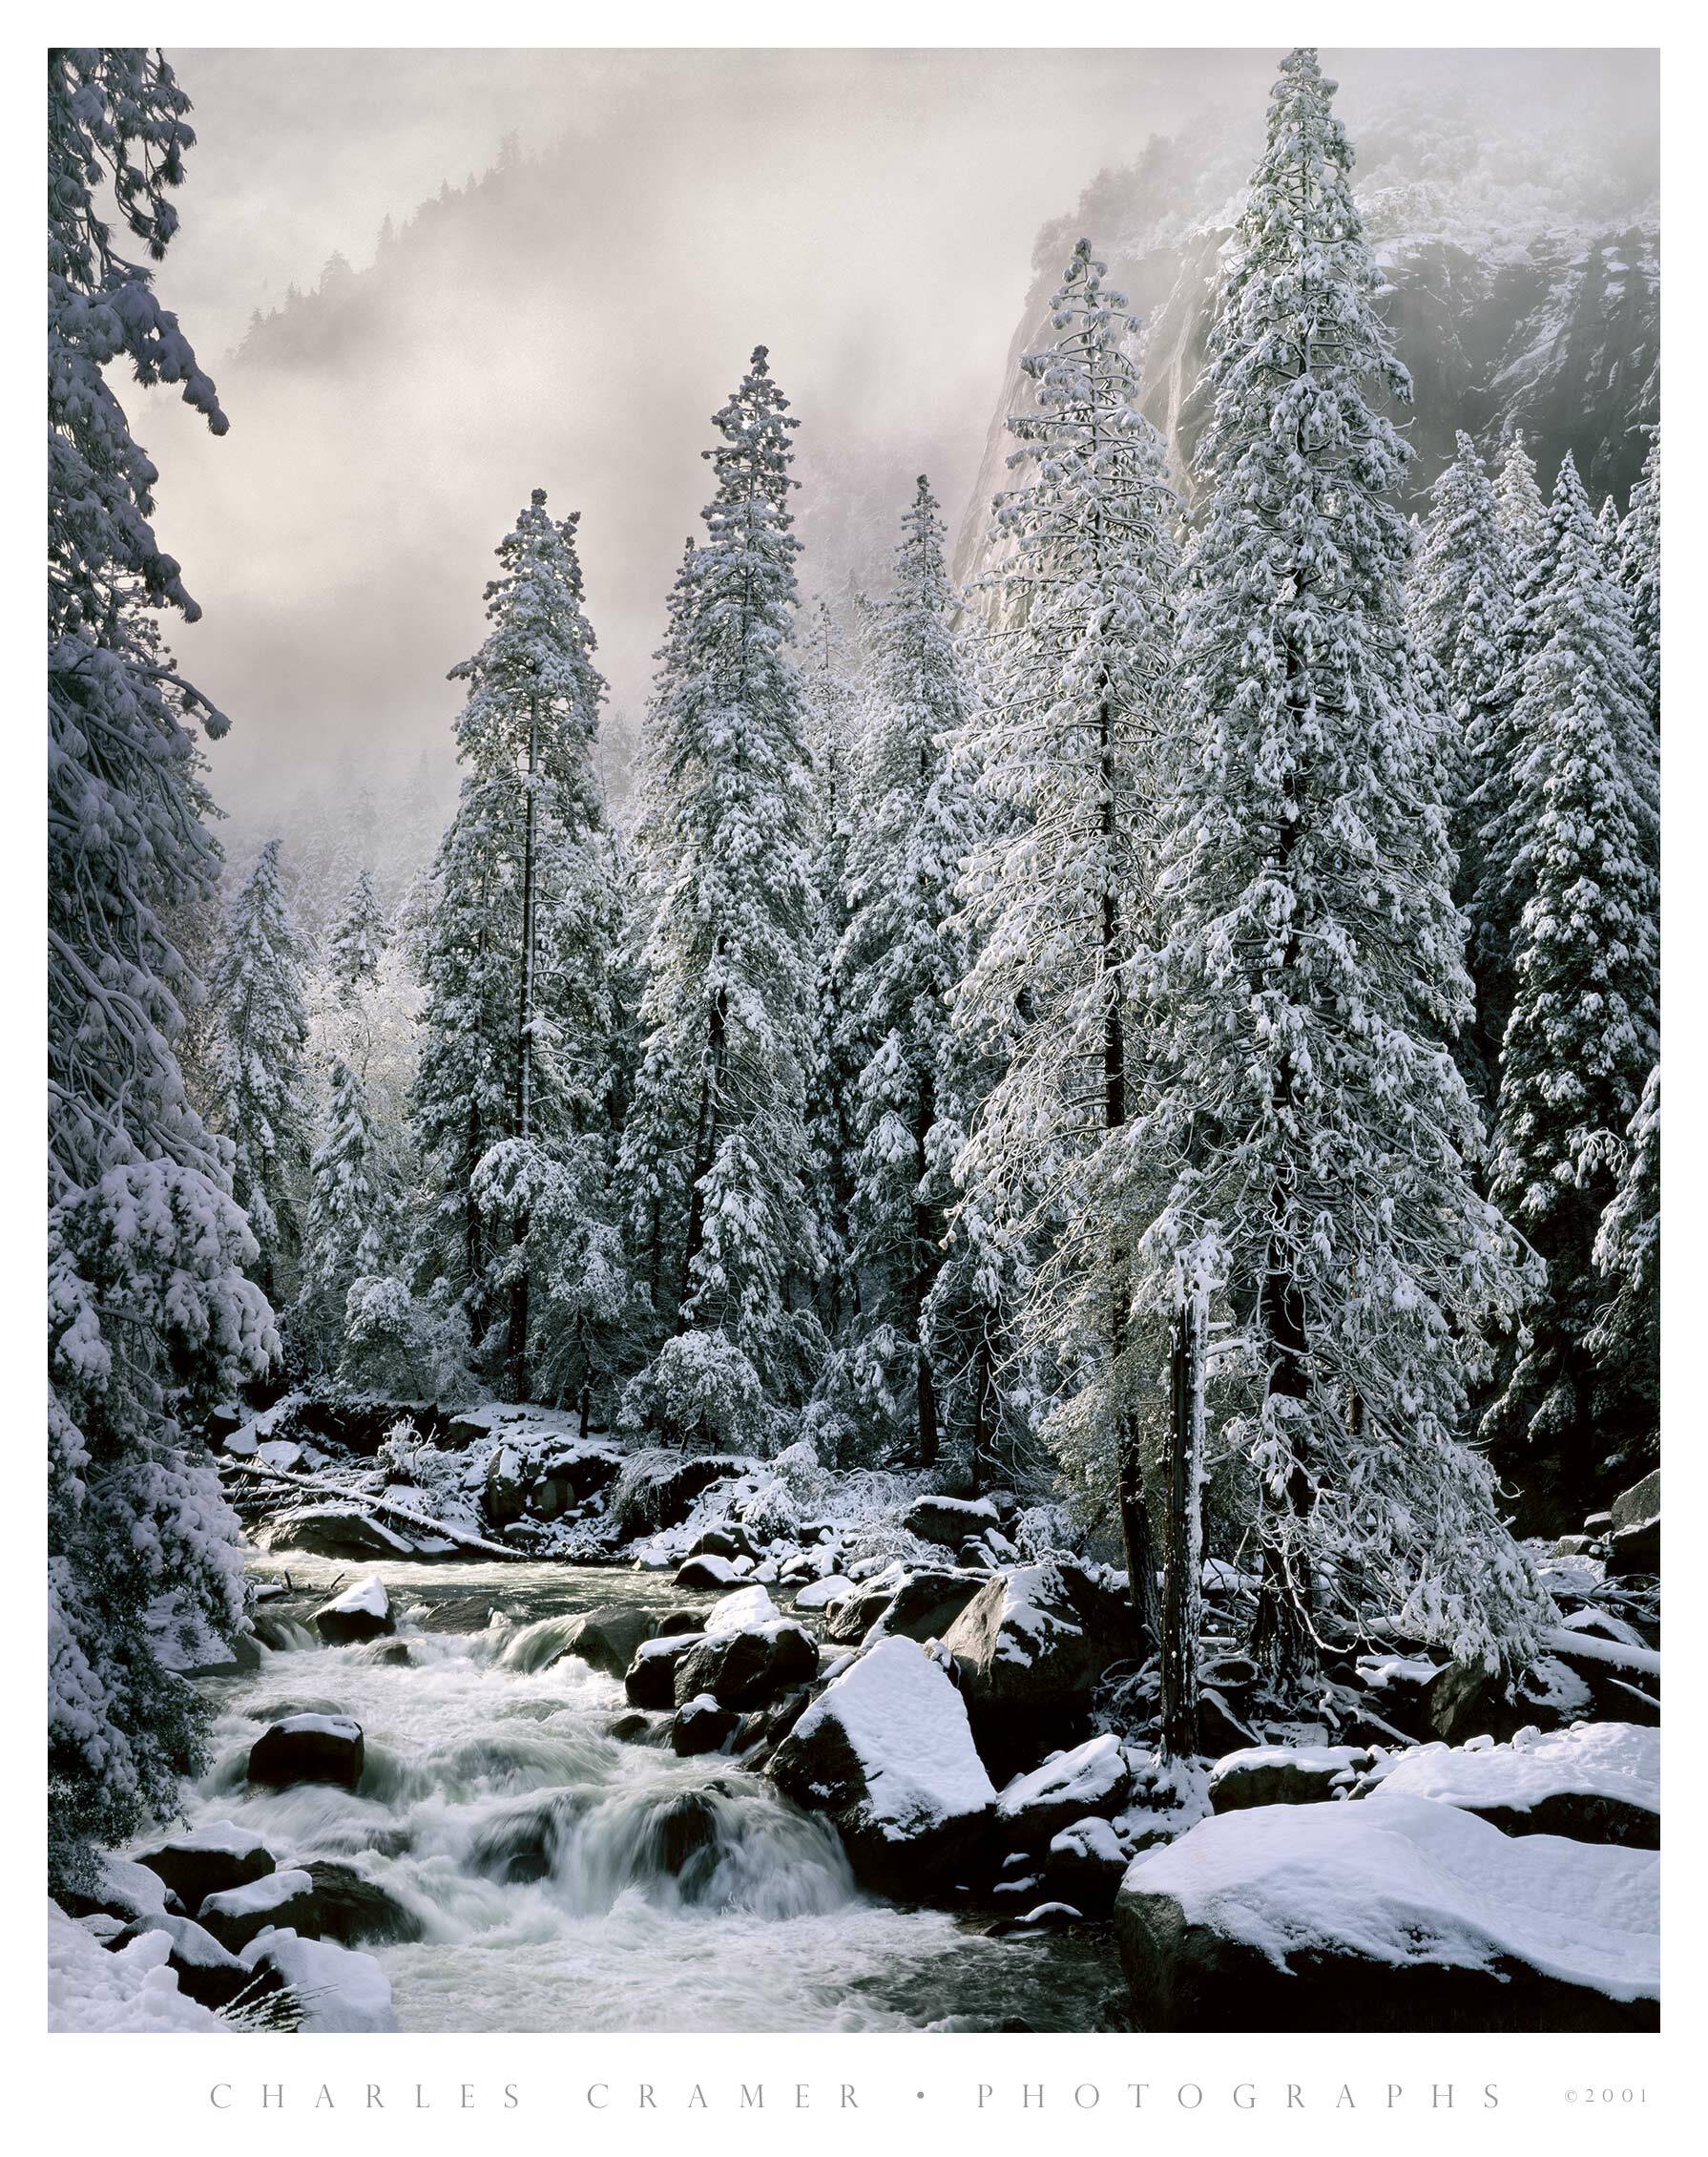 Clearing Snowstorm, Merced River, Yosemite